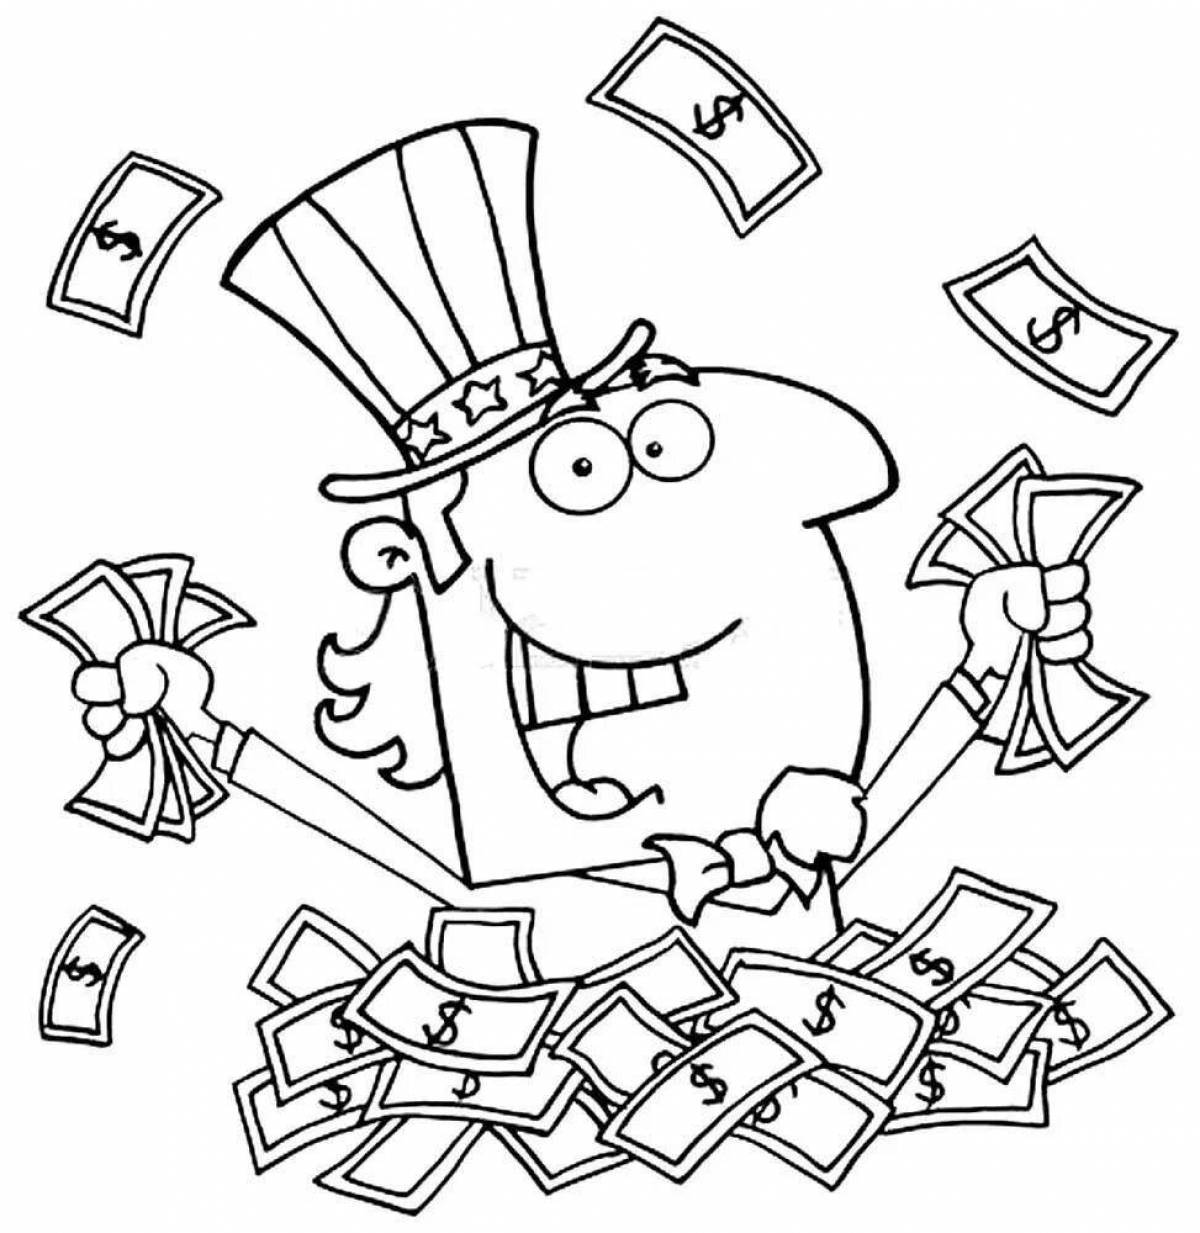 Fun financial literacy coloring book for kids